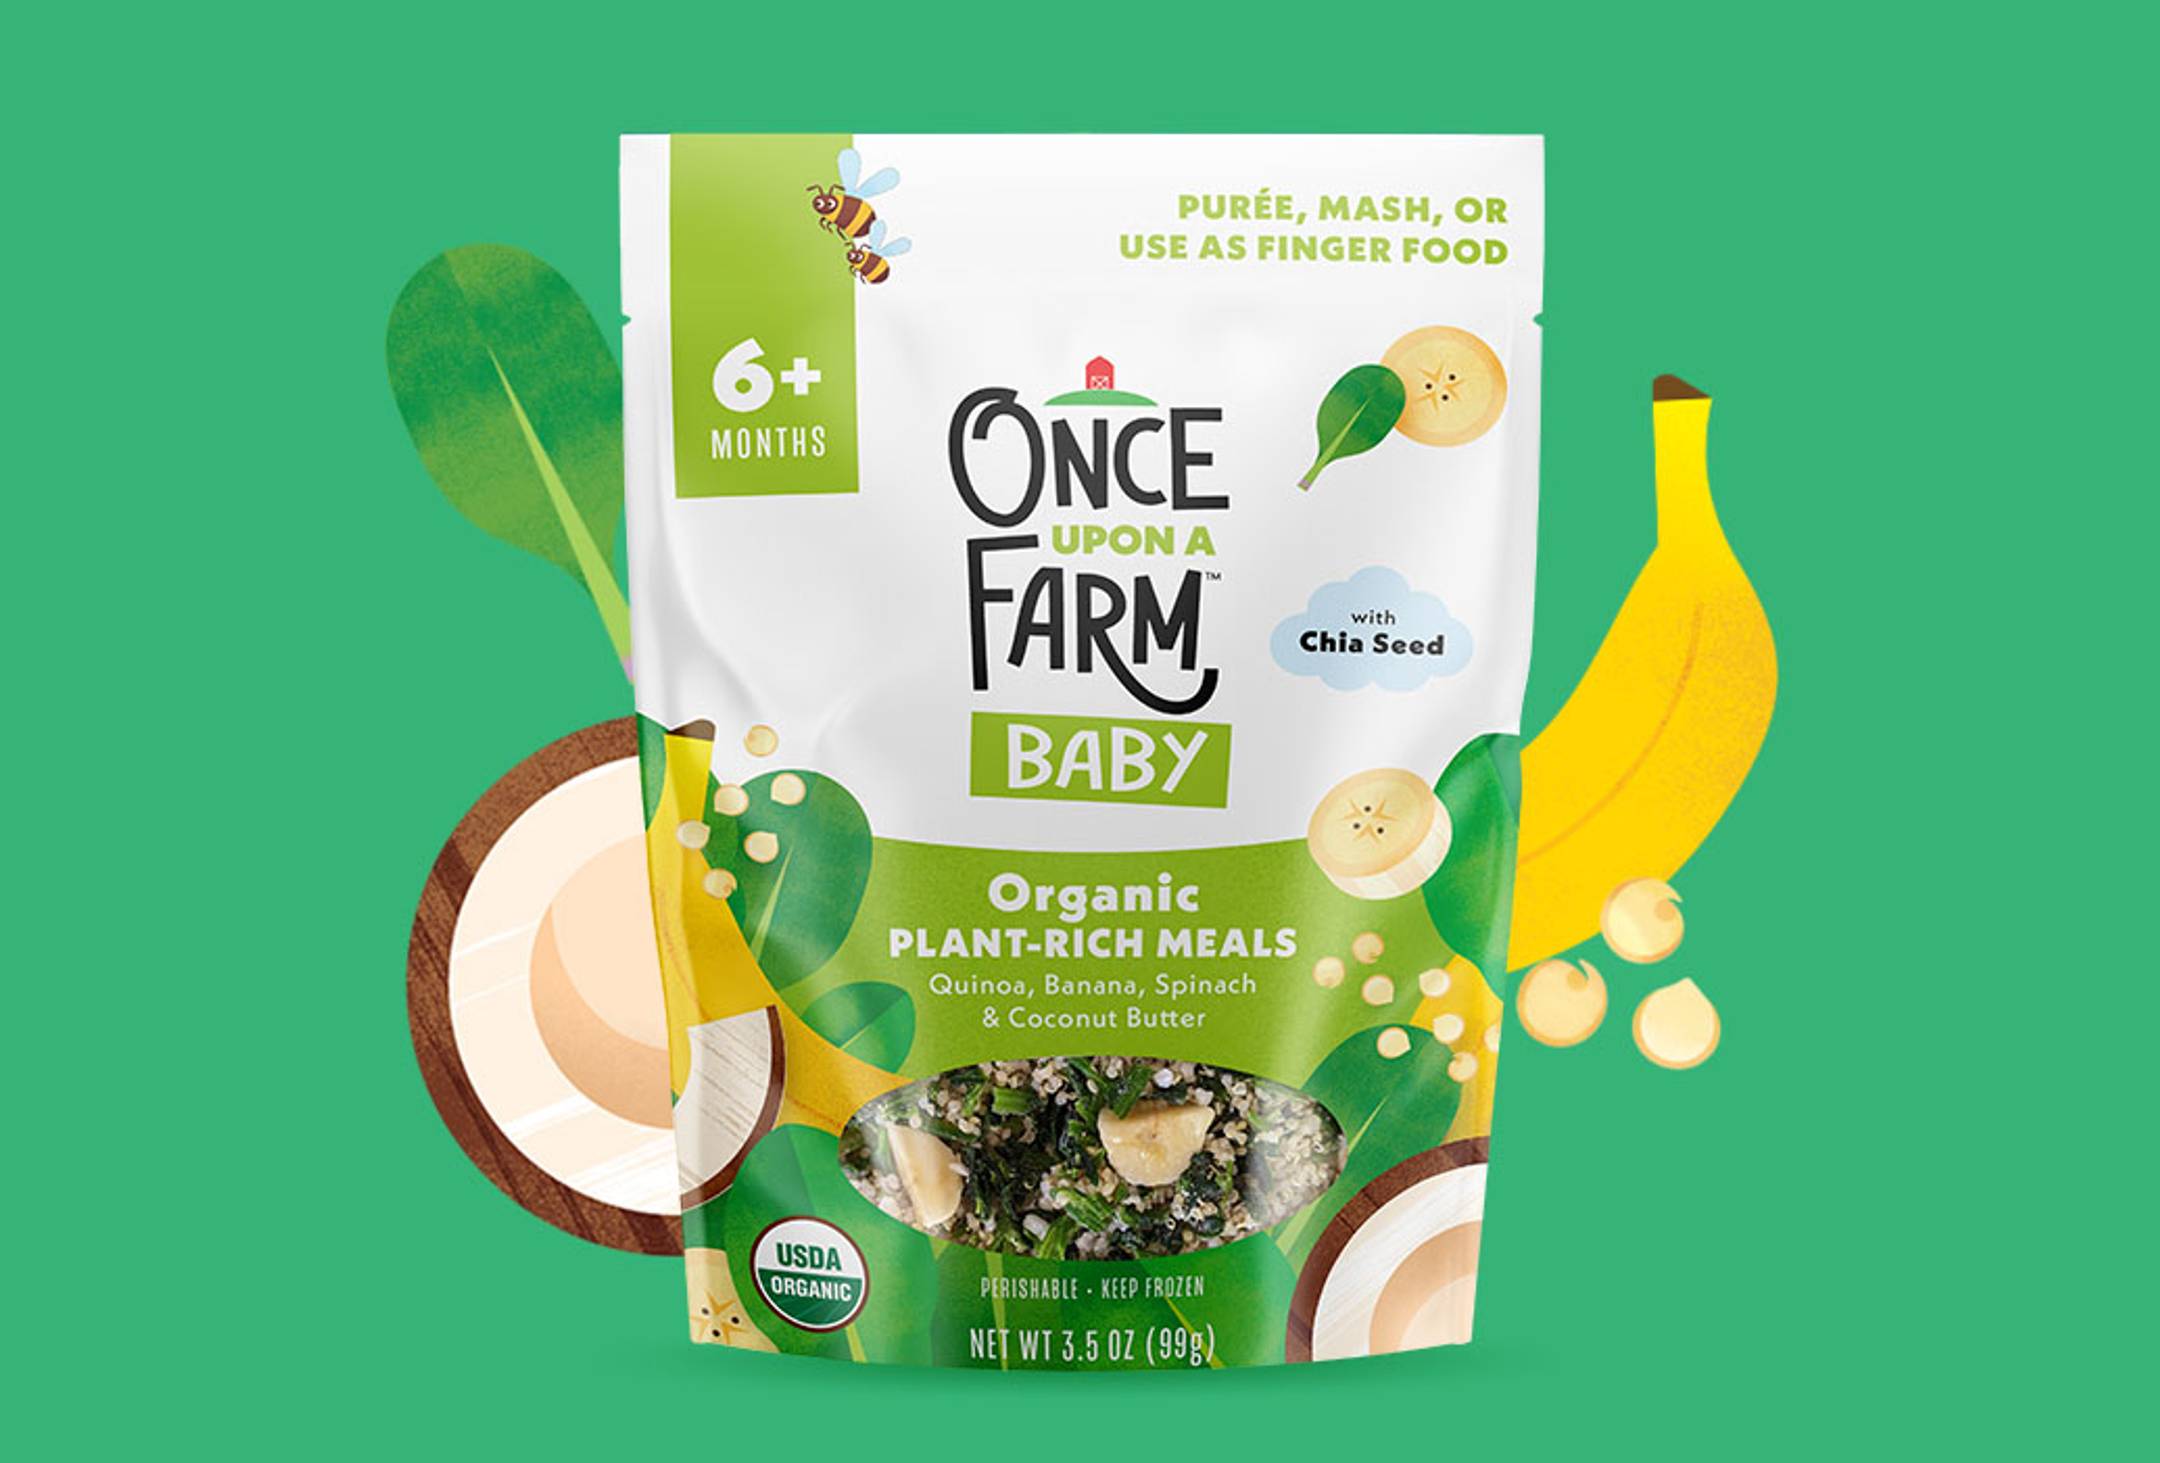 Once Upon a Farm Organic Meal made with Quinoa, Banana, Spinach, and Coconut Butter